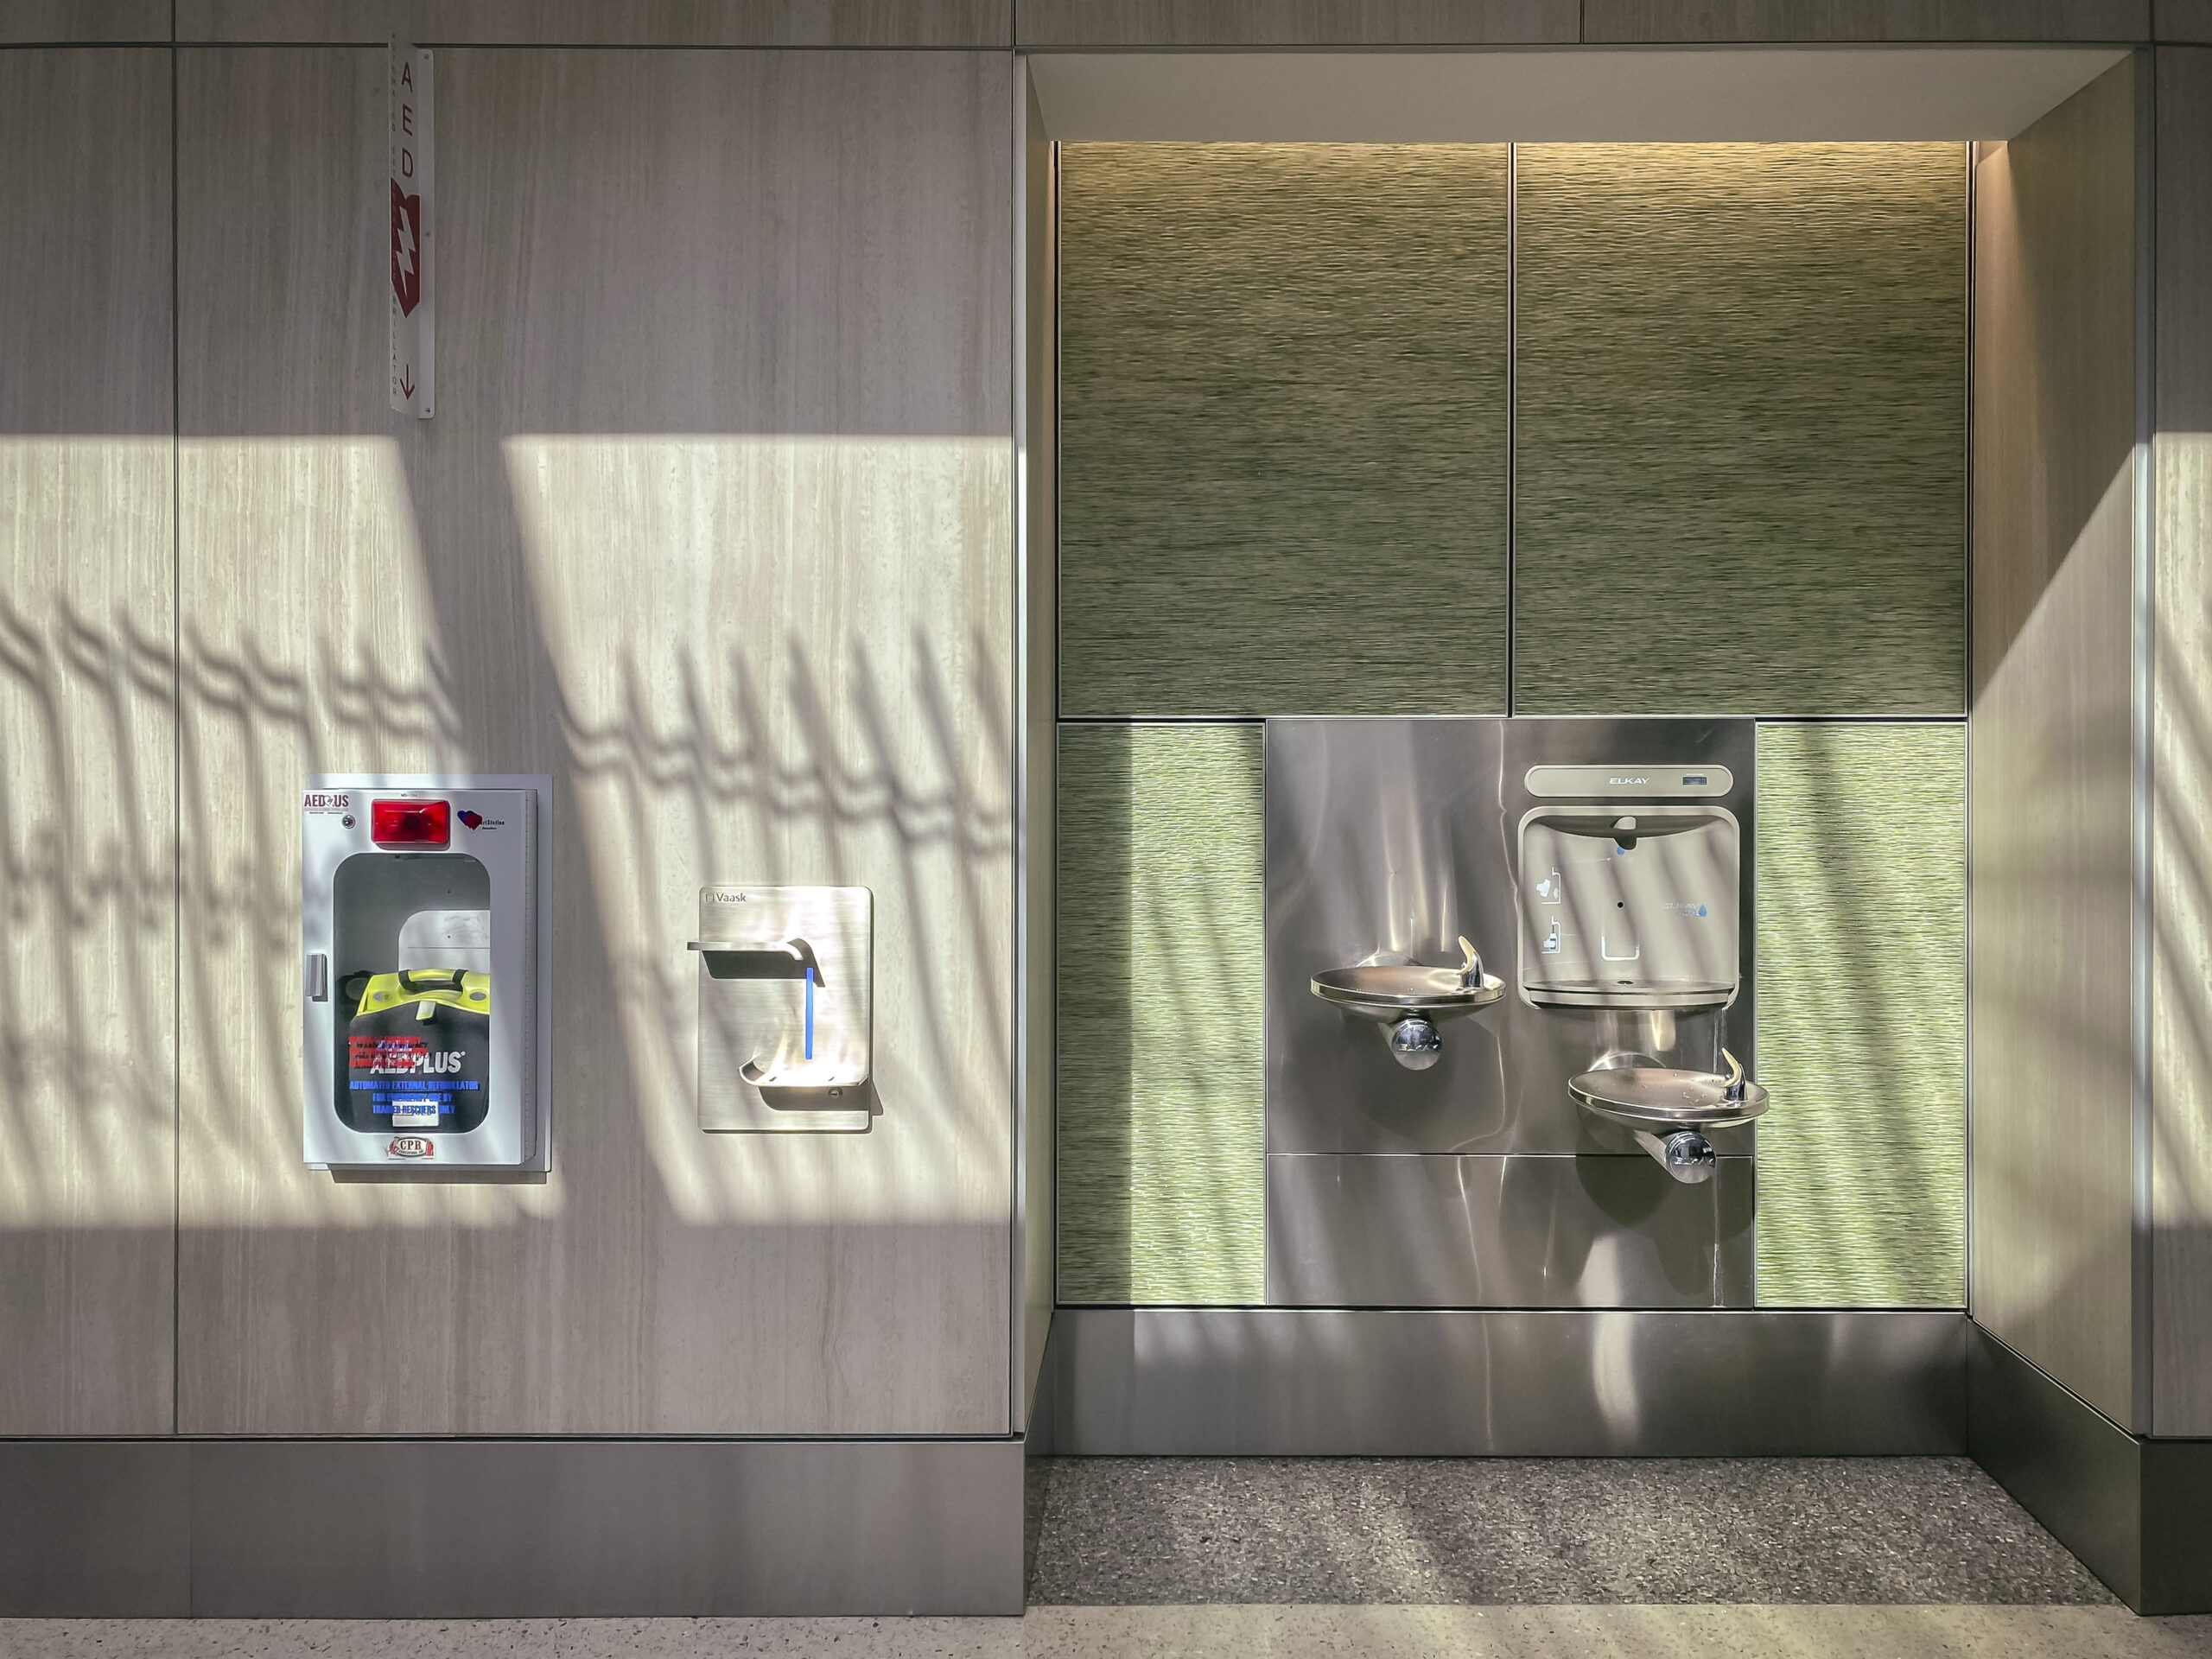 The Nashville International Airport installed Vaask's touchless hand sanitizing fixtures because of their easy maintenance, as there are no batteries to change and an app alerts staff when it’s time to refill